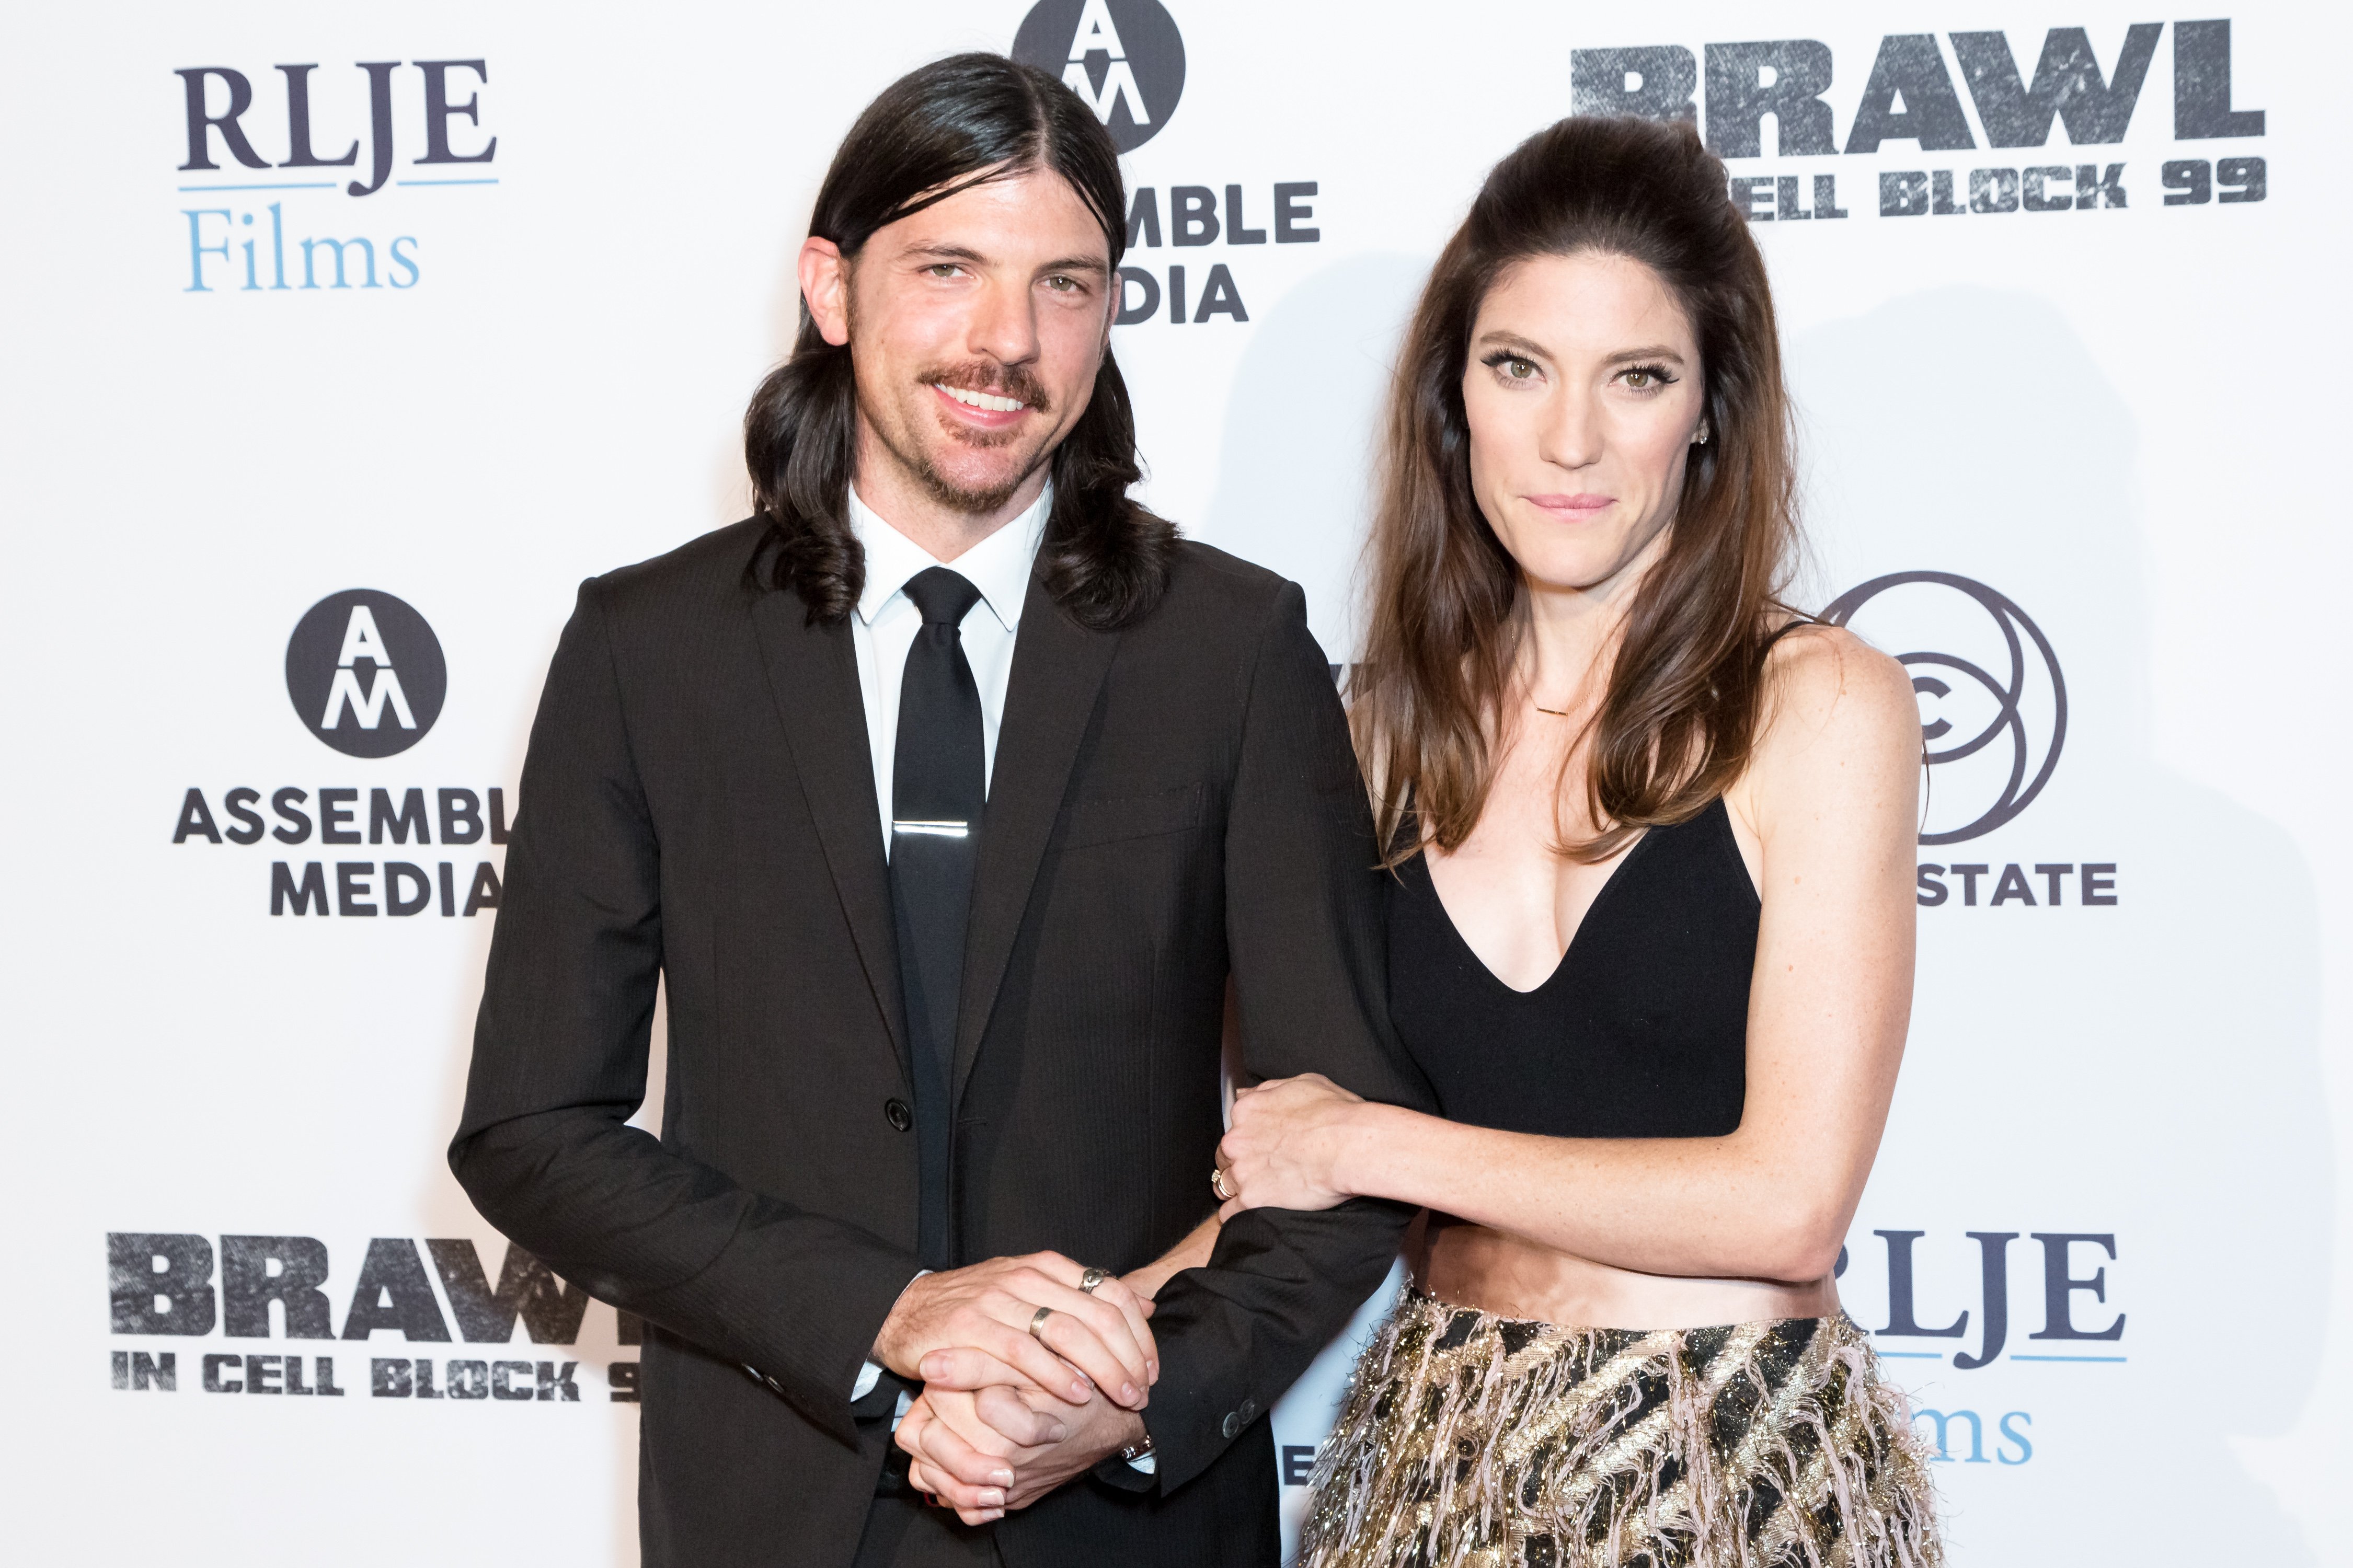 Jennifer Carpenter and her husband Seth Avett arrive for the Premiere Of RLJE Films' "Brawl In Cell Block 99" at The Egyptian Theatre on September 29, 2017, in Los Angeles, California. | Source: Getty Images.